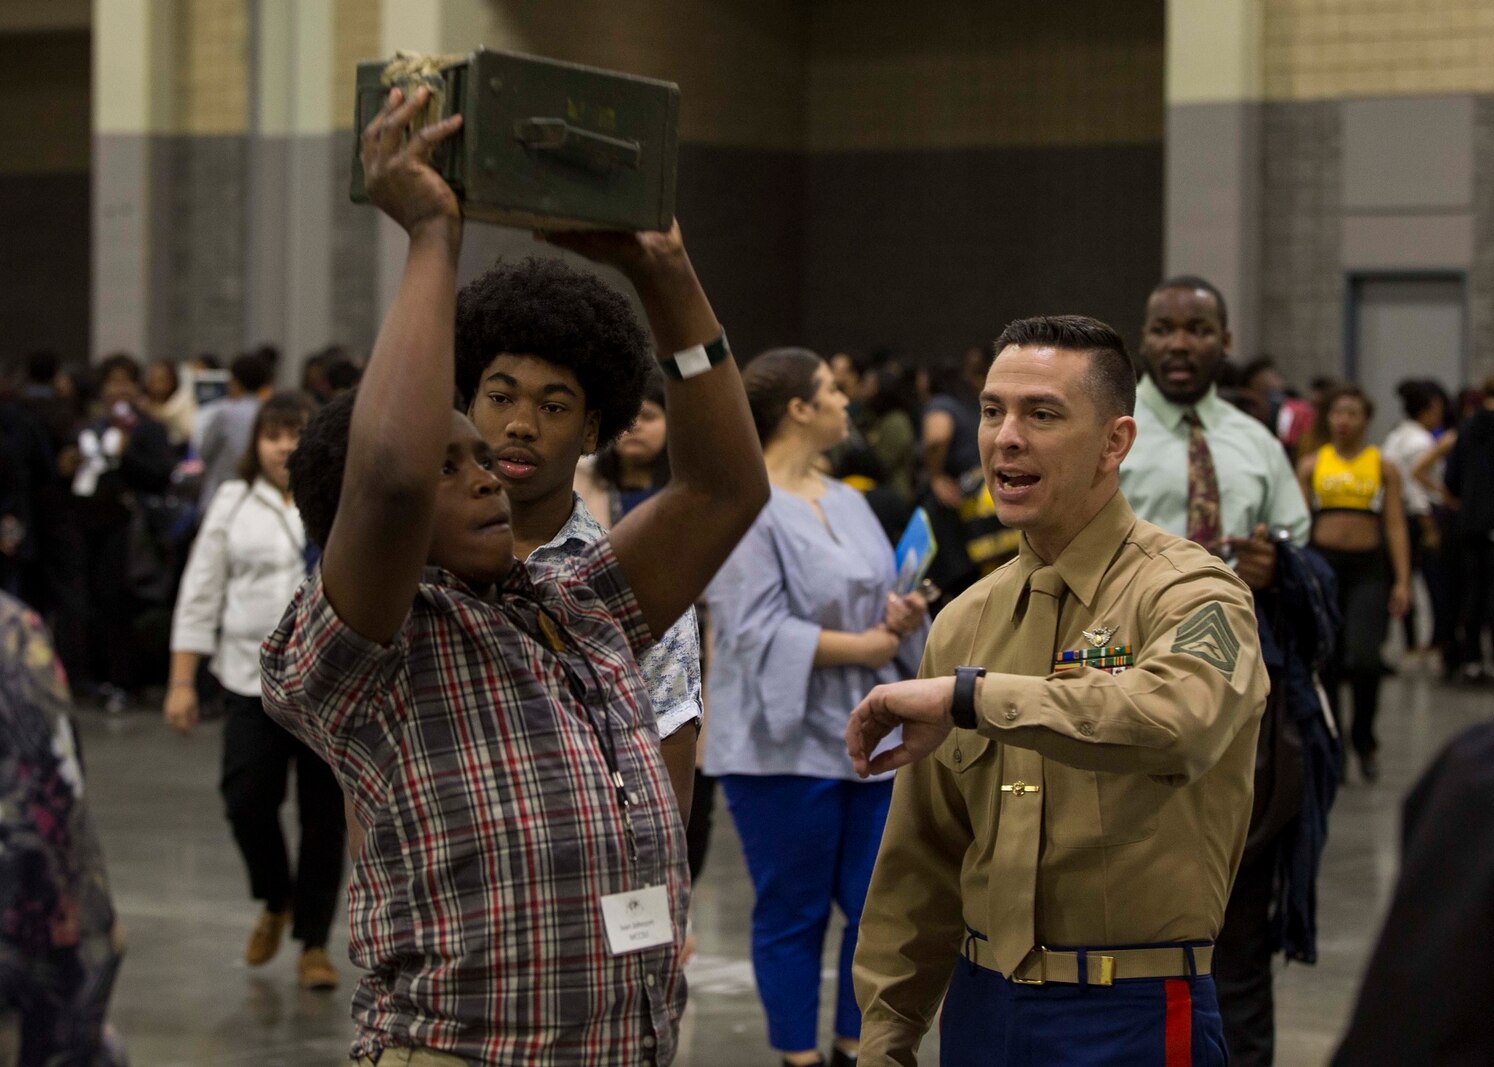 Gunnery Sergeant Bryan Davis, staff noncommissioned officer-in-charge of Recruiting Substation Charlotte, observes an attendant of the Central Intercollegiate Athletic Association (CIAA) Education Day participating in ammo-can lifts at the Charlotte Convention Center, Charlotte, North Carolina, on Feb. 28, 2018. The Marines took part in the Education Day at the CIAA to spread awareness and inform others of the opportunities the Marine Corps can provide. The Education Day assists recruiters by offering them different tools to reach students across the state. (U.S. Marine Corps photo by Lance Cpl. Jack A. E. Rigsby)